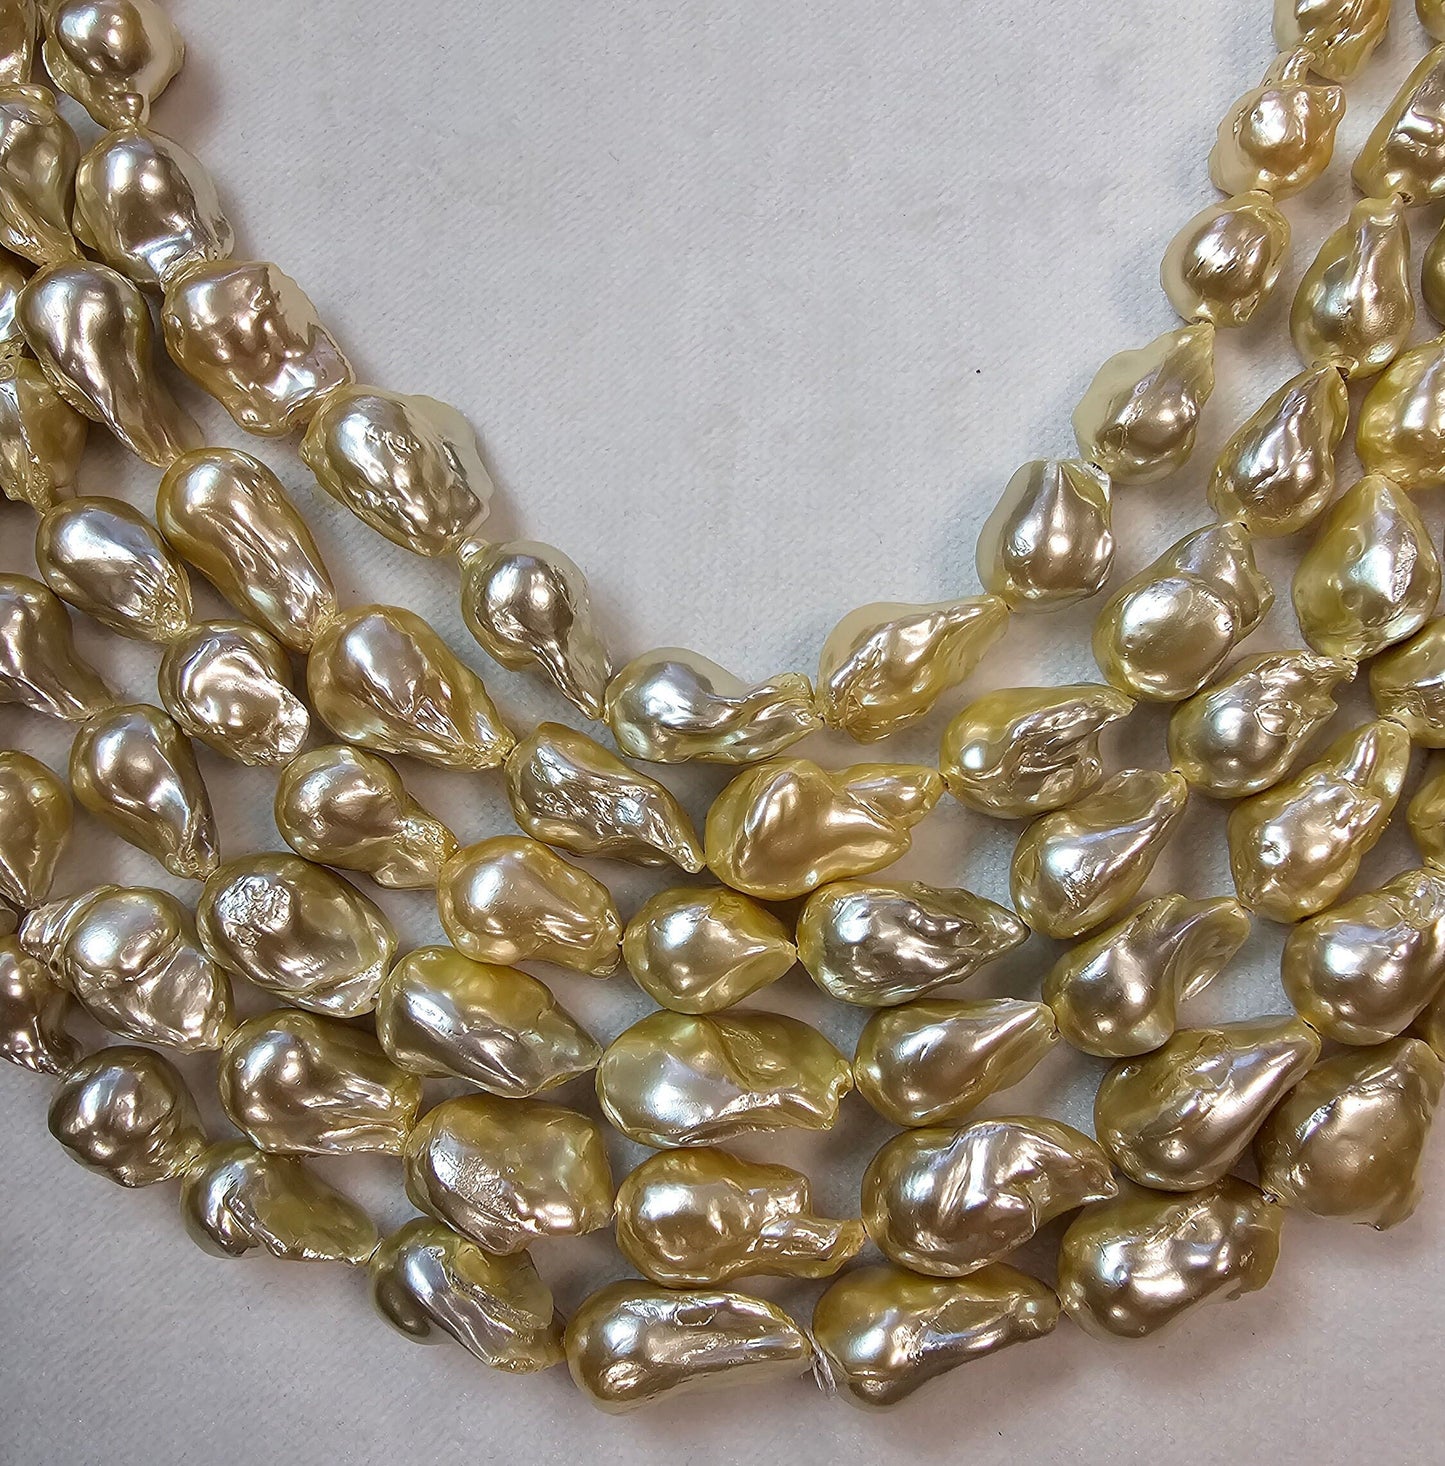 Natural Freshwater Gold Baroque Pearl Beads with length 16" size 16-30 mm